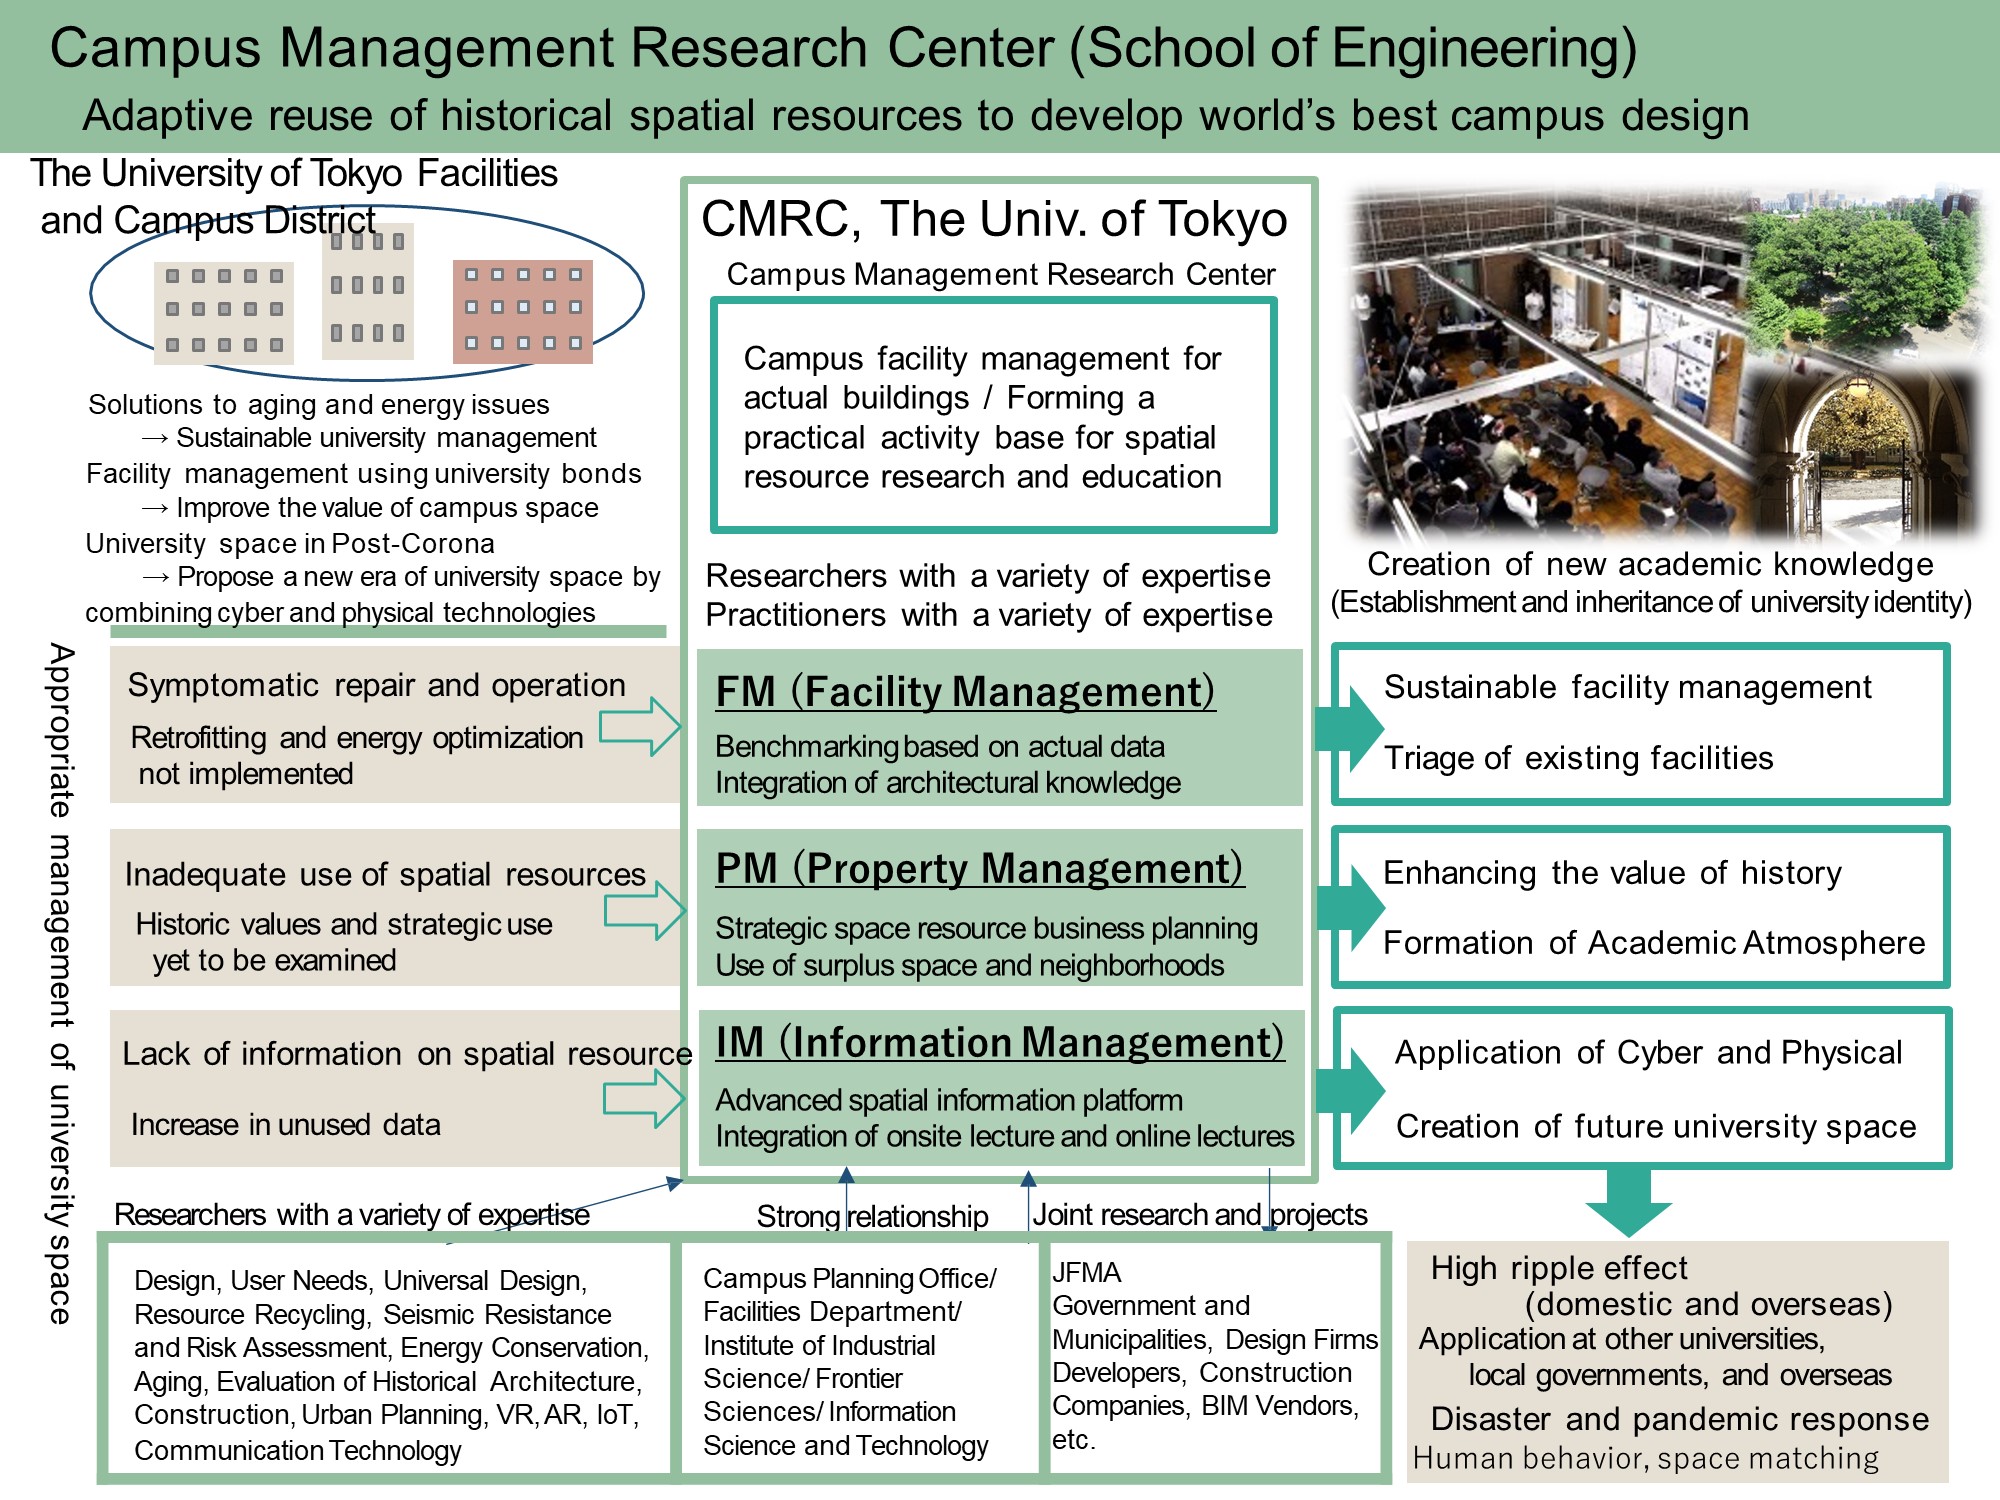 Overview of the Campus Management Research Center